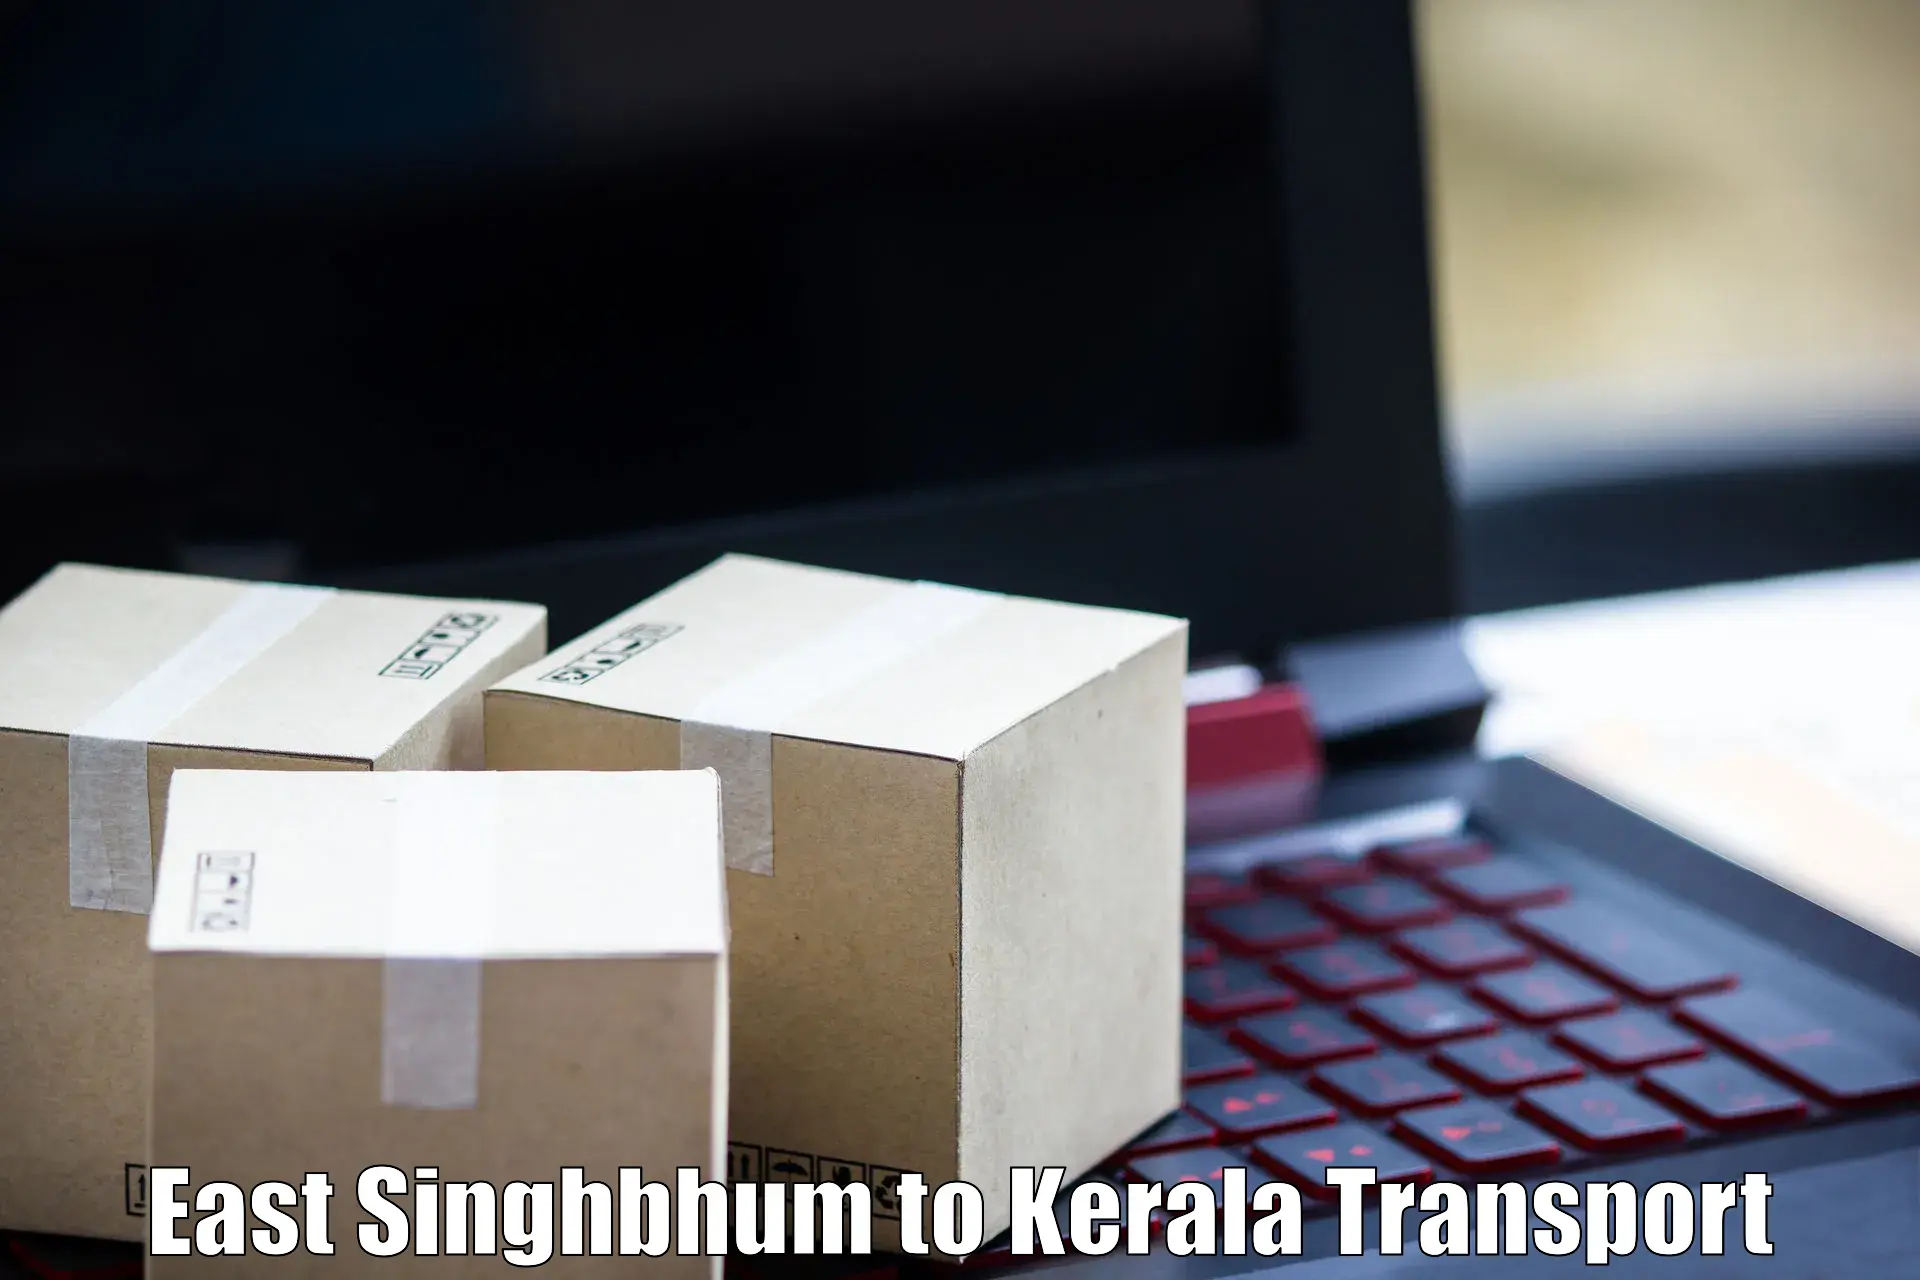 Material transport services in East Singhbhum to Tiruvalla